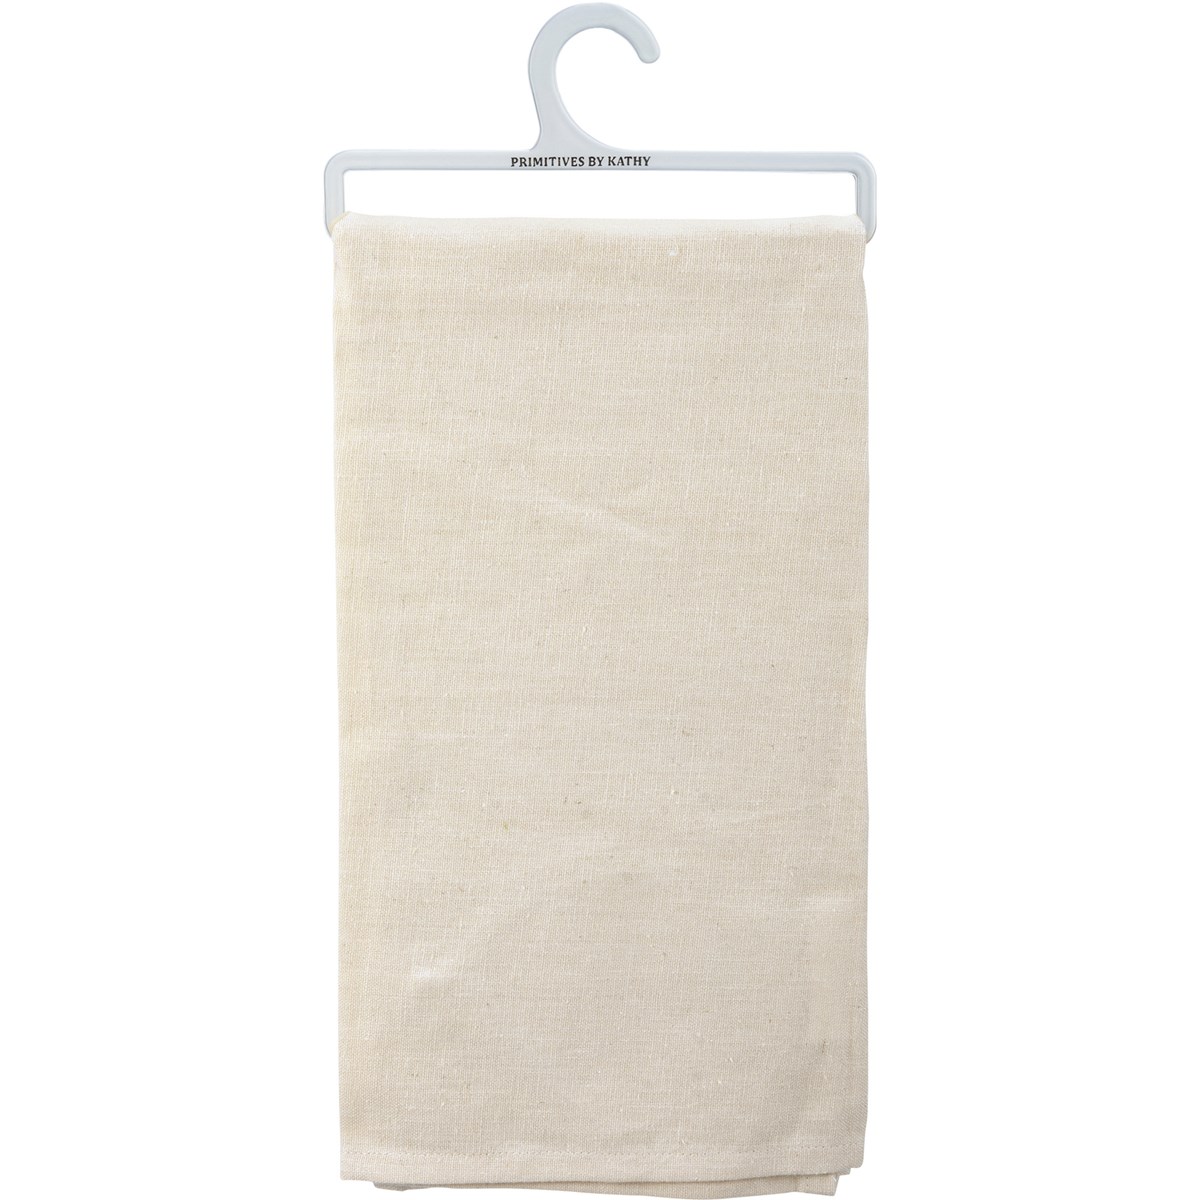 Home Is Where Your Cat Is Kitchen Towel - Cotton, Linen